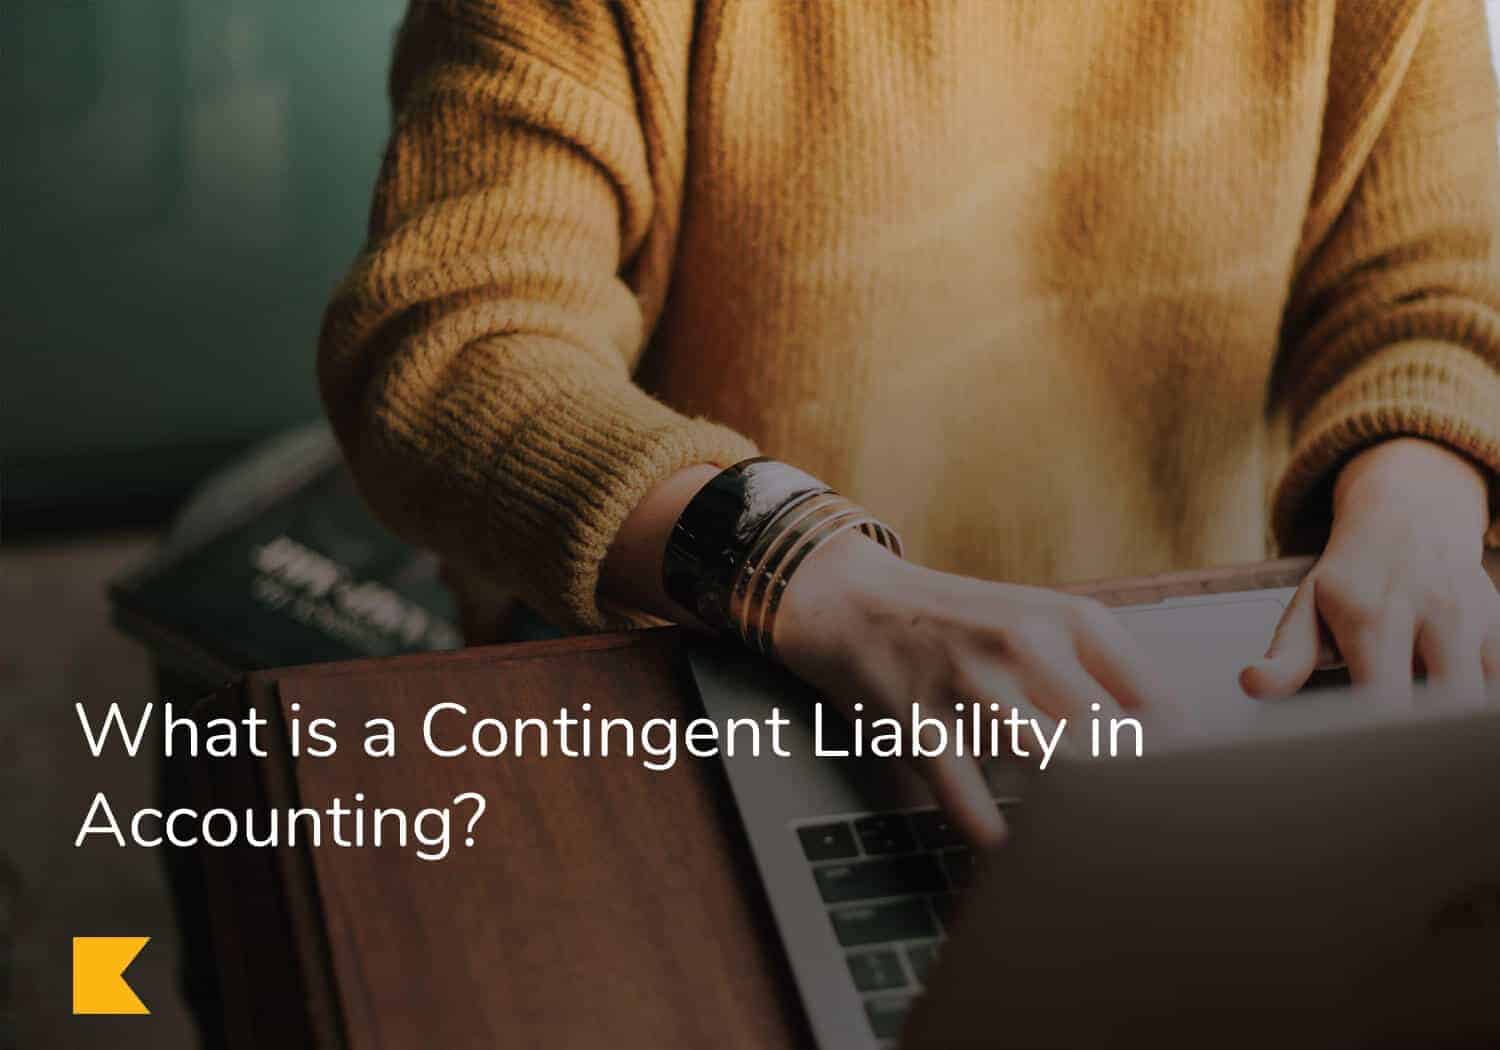 What is a Contingent Liability in Accounting?